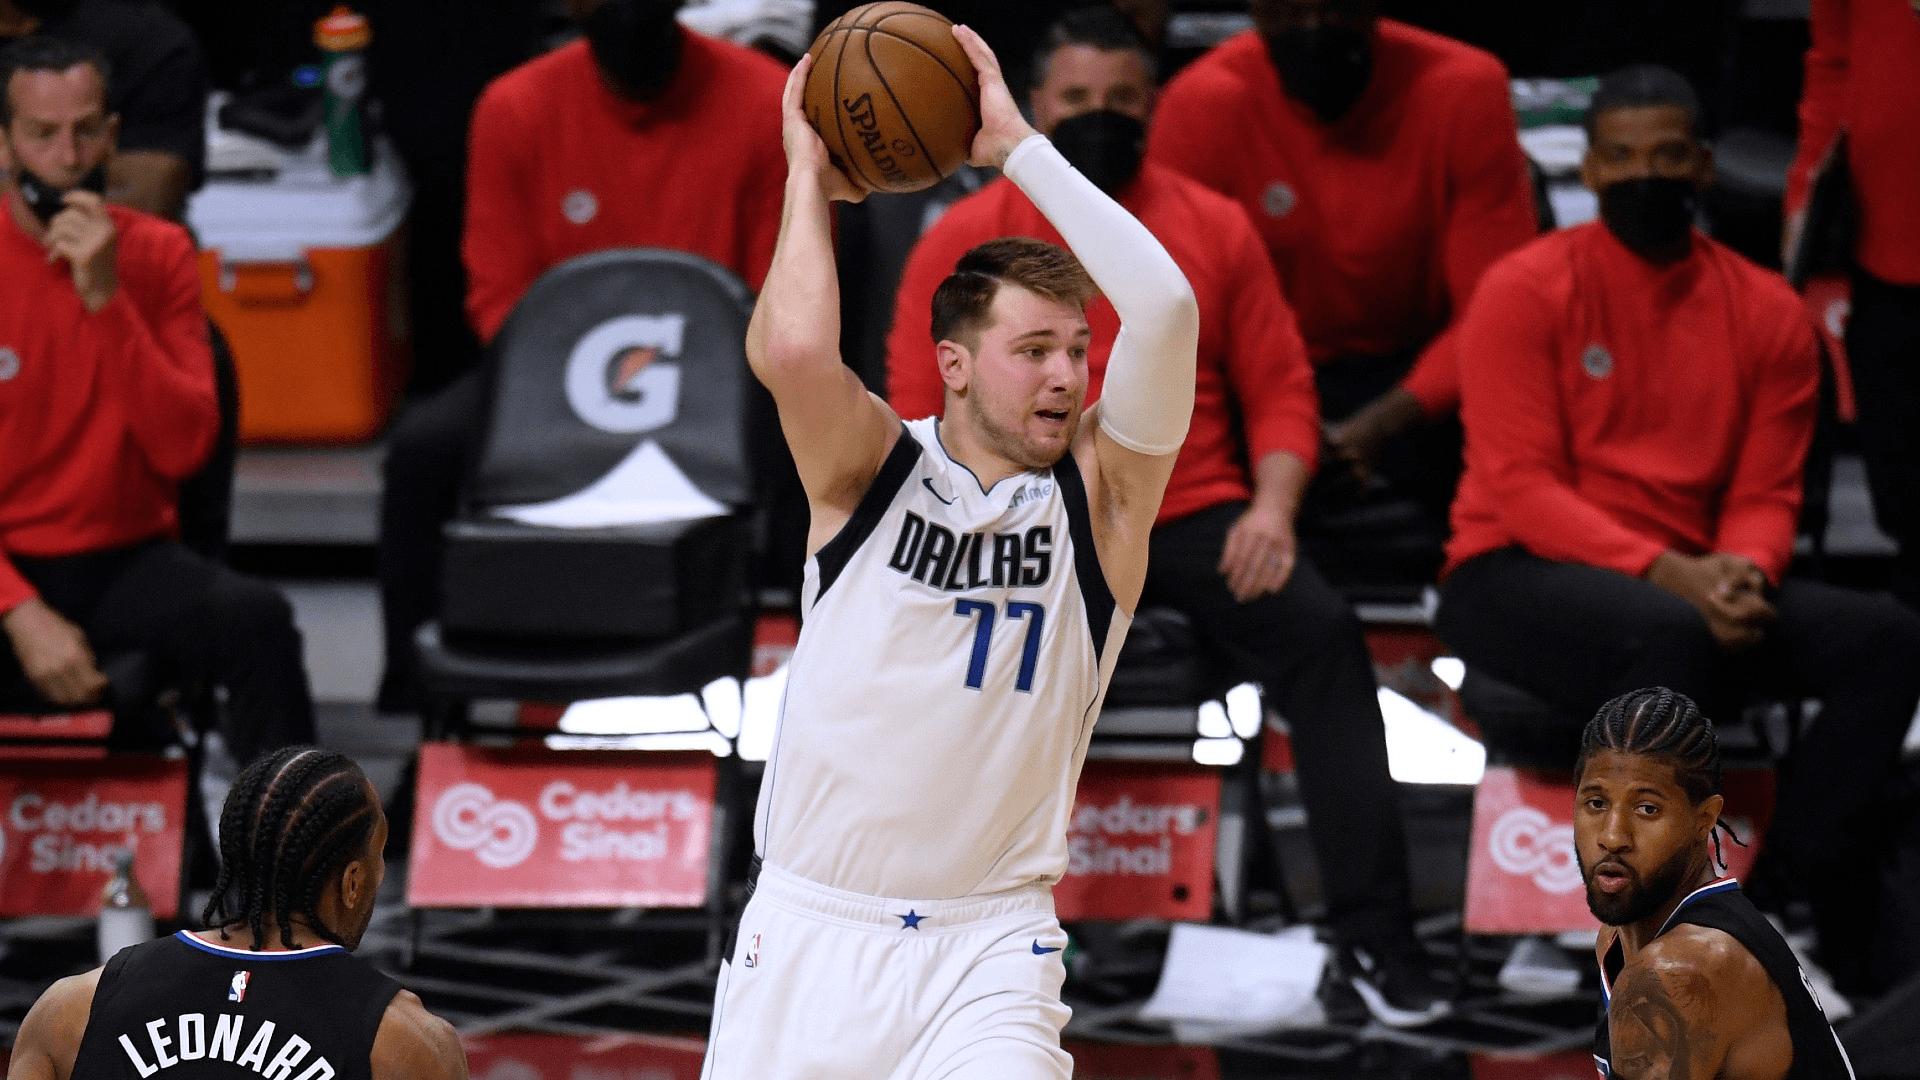 Clippers vs Mavericks Game 4 Preview: With Doncic Dinged Up, Will the Road Team Win a Fourth Straight Game?